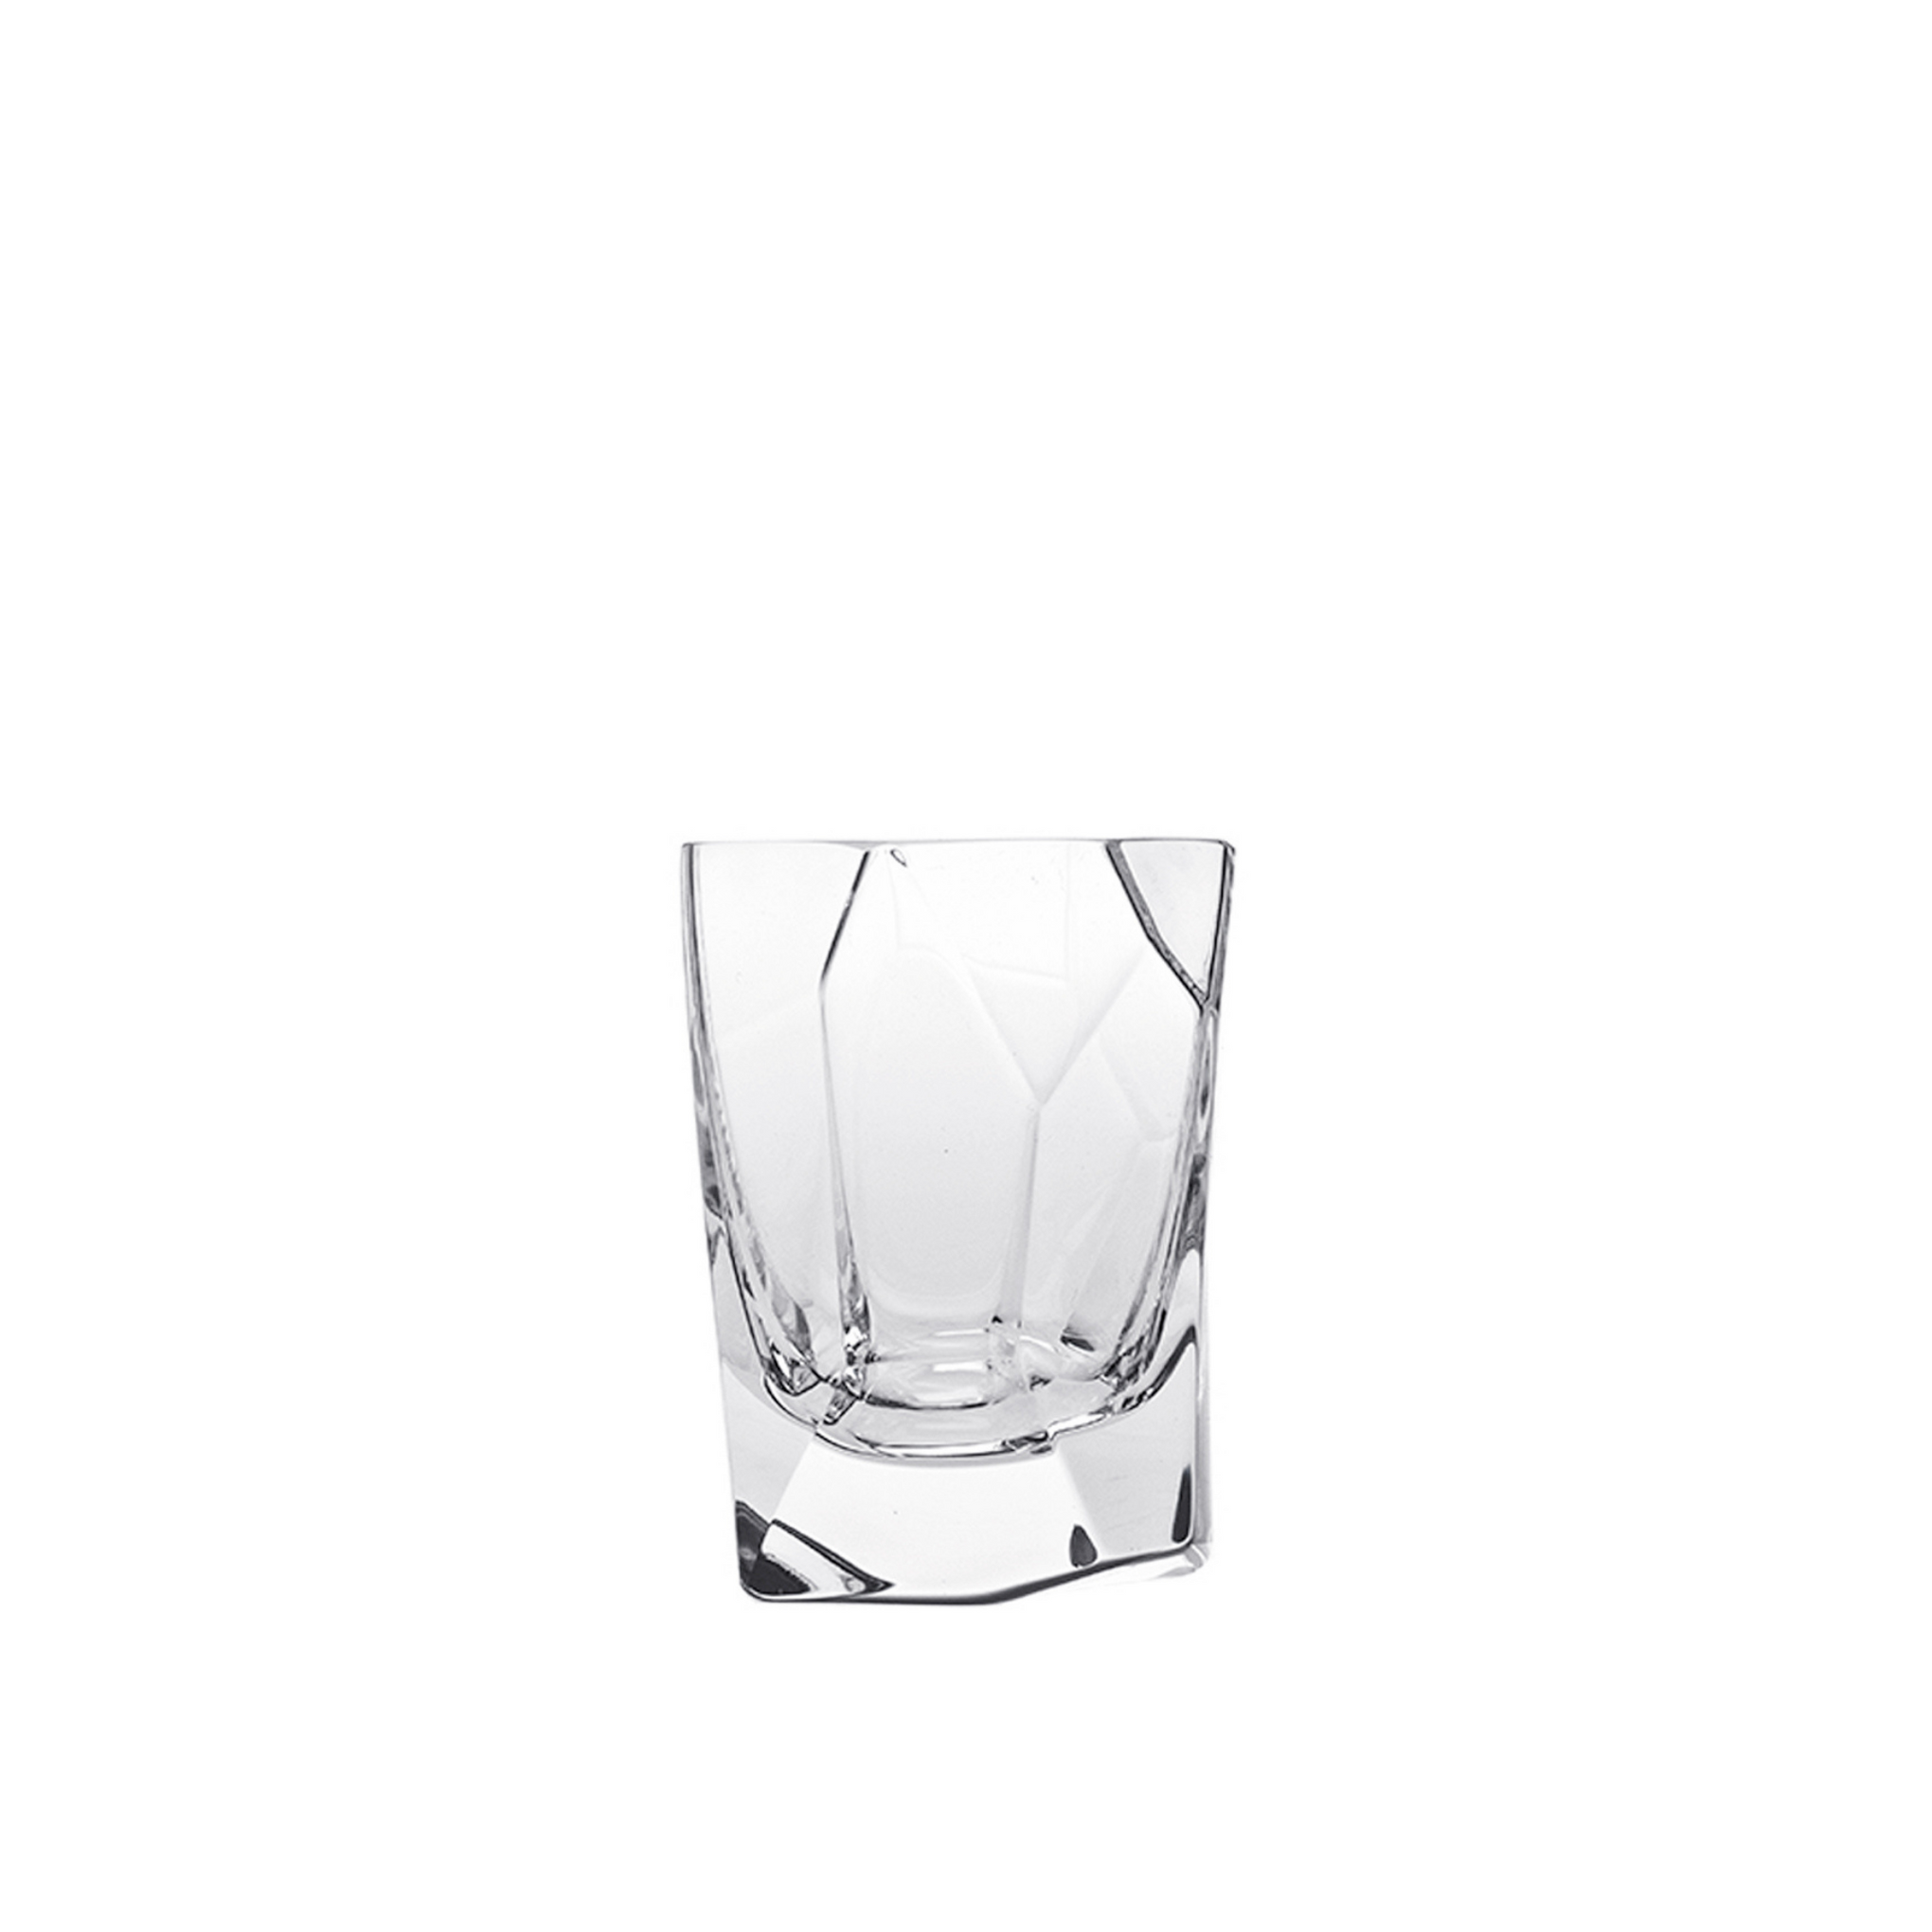 Crystal shot glass clear